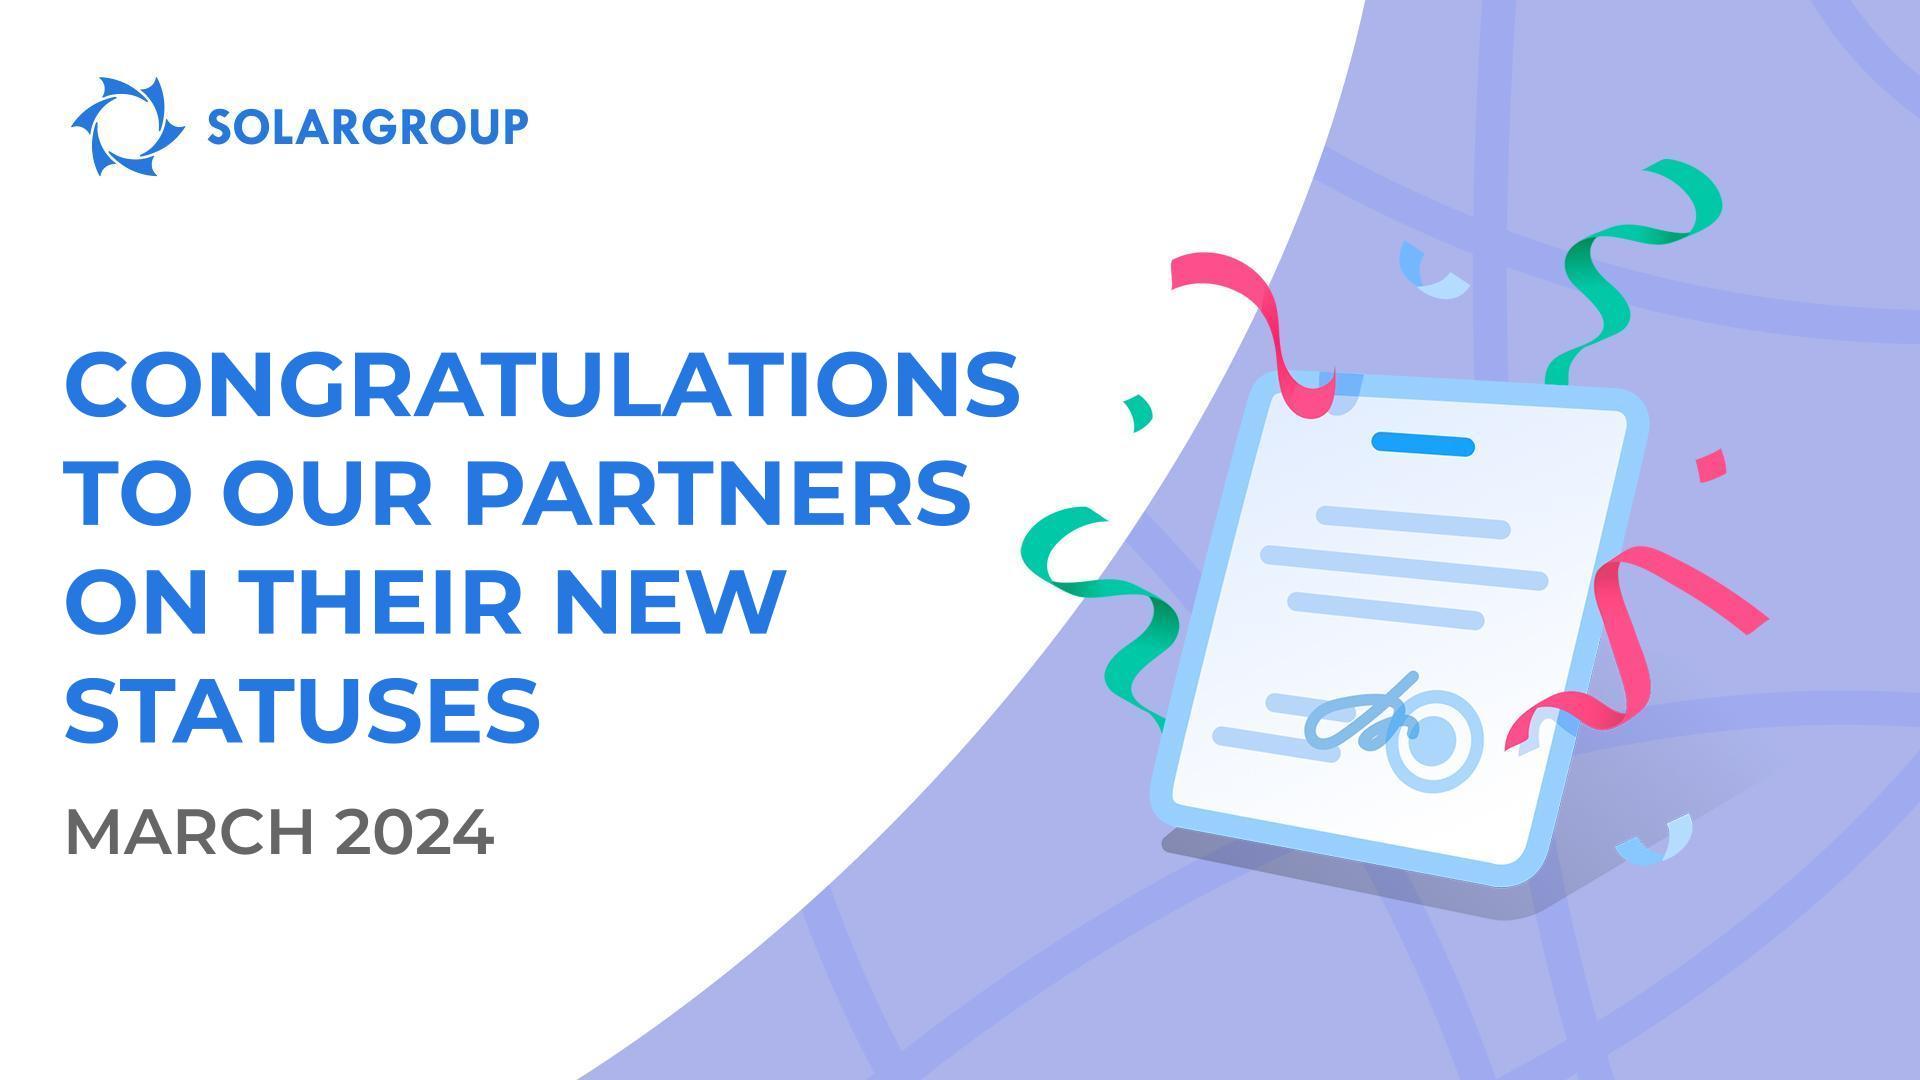 We welcome our partners to their new statuses!👏